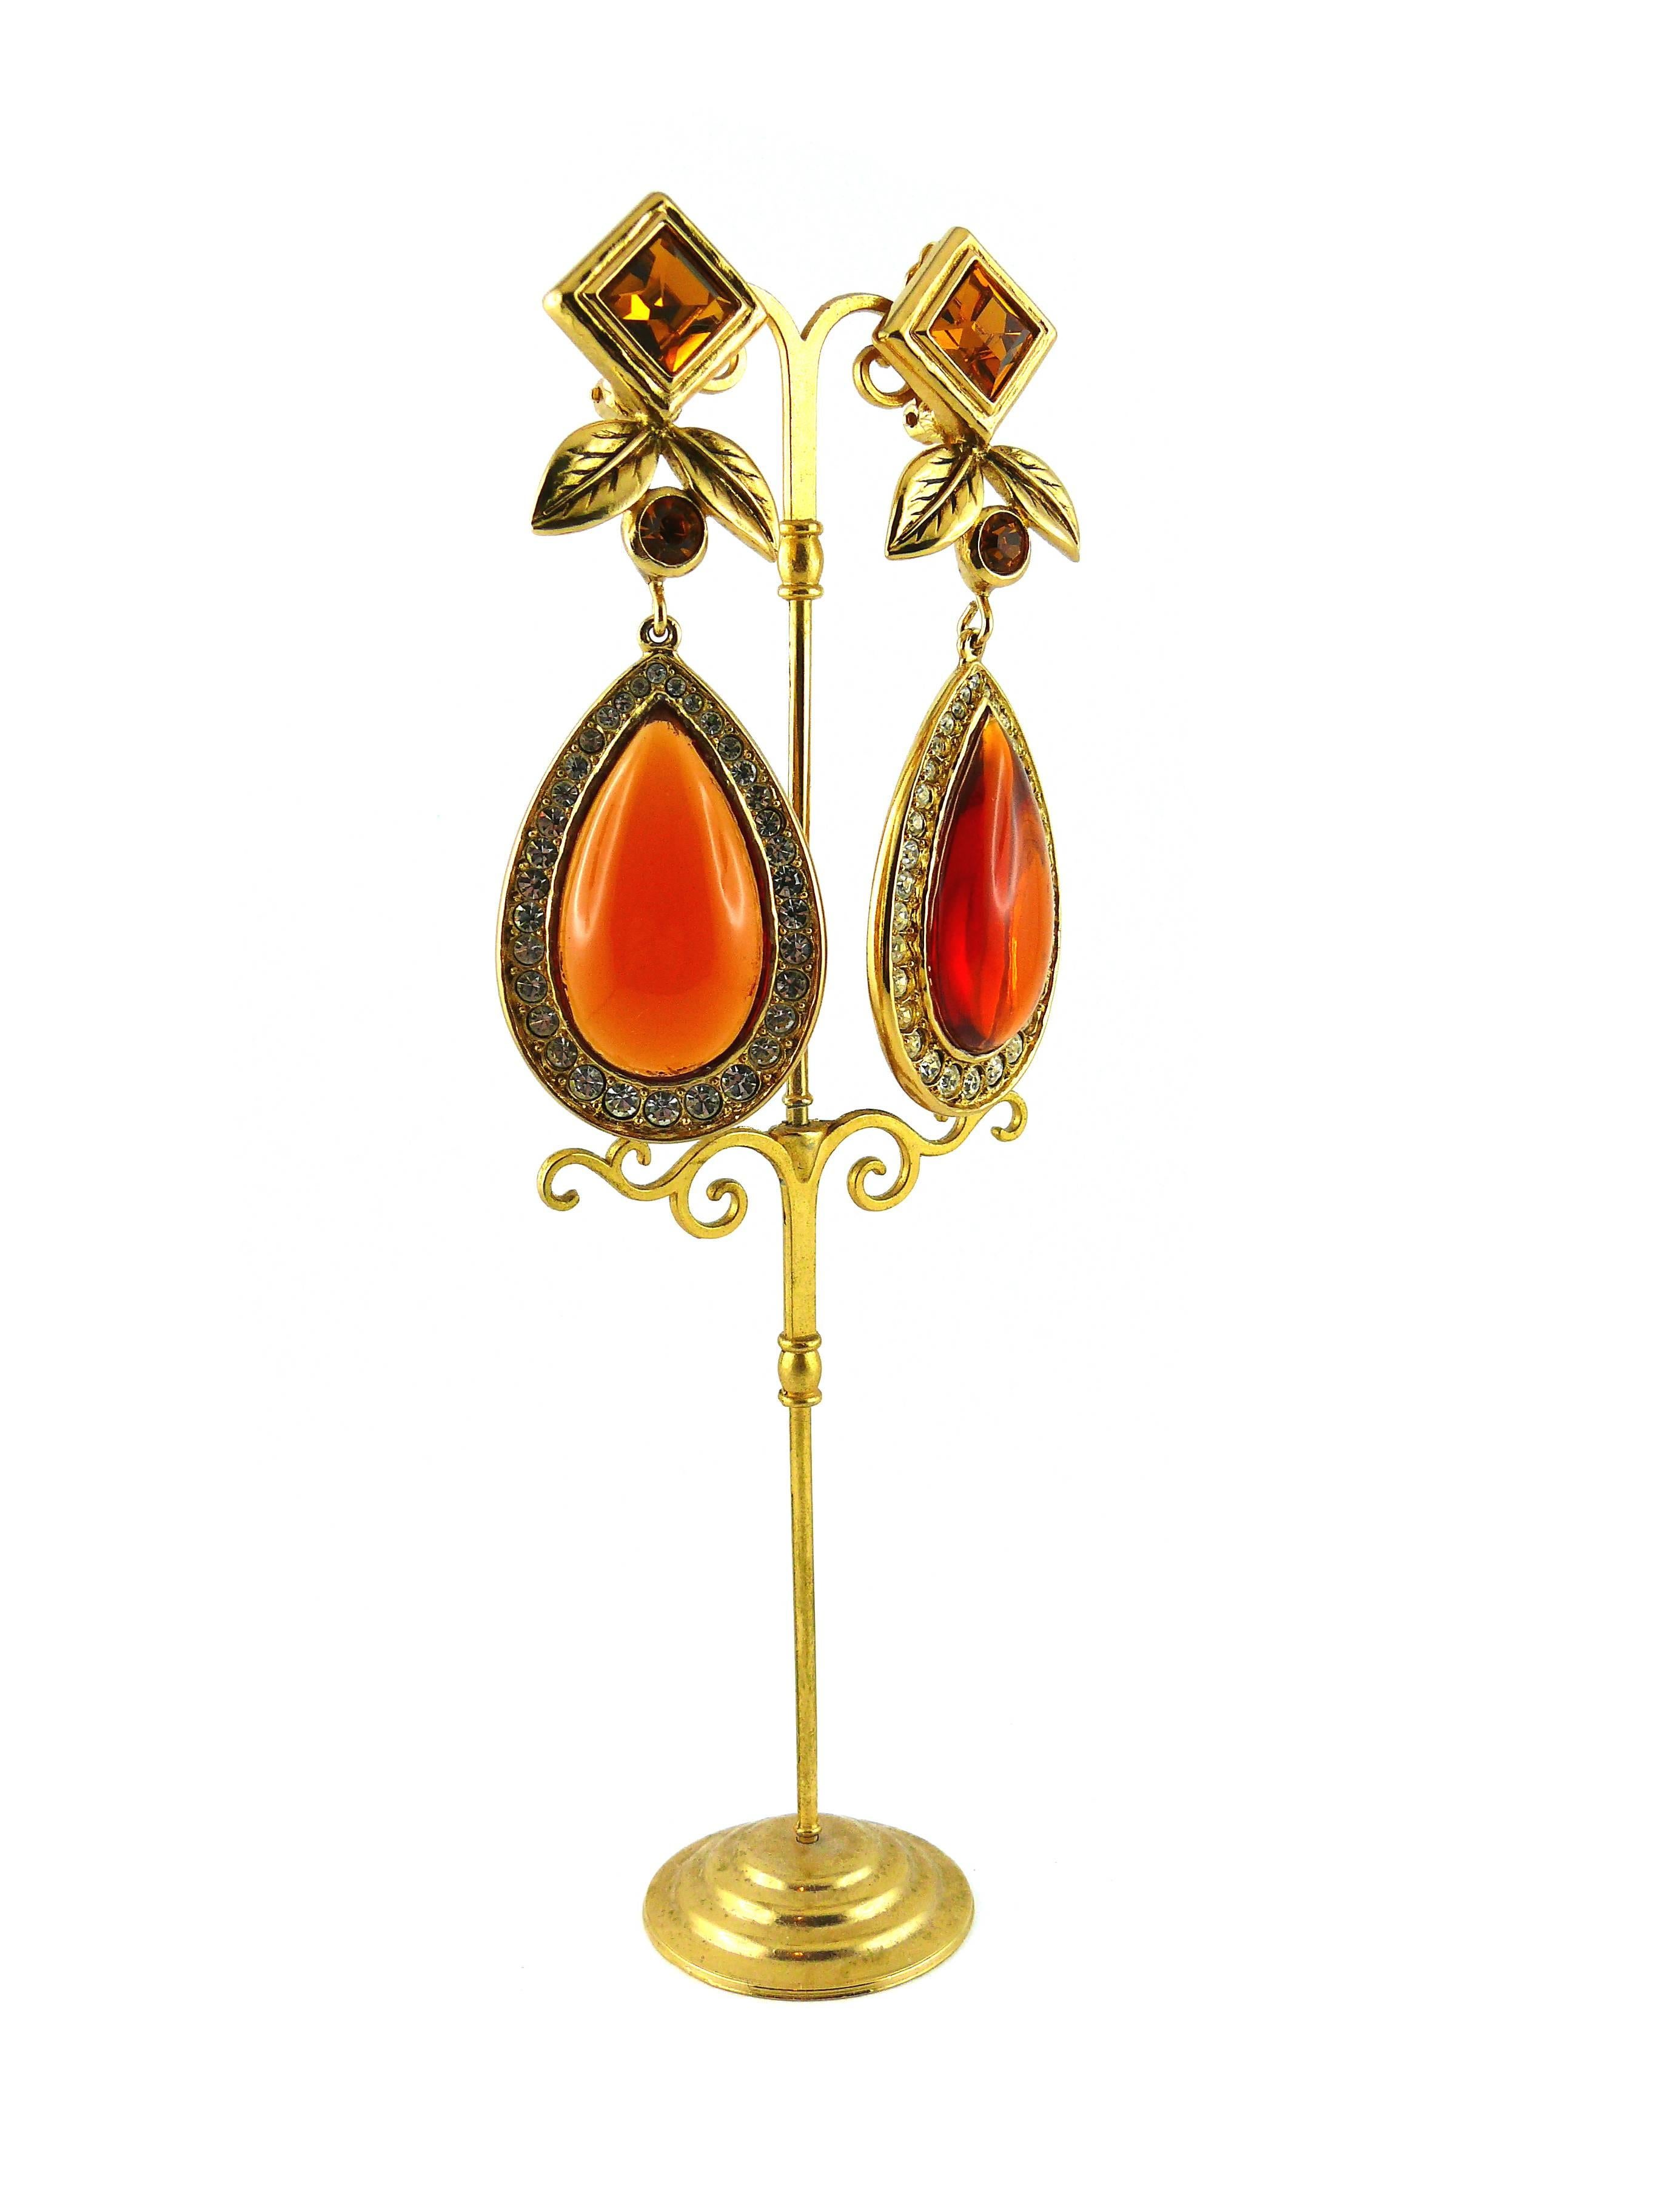 JEAN LOUIS SCHERRER vintage massive runway dangling earrings (clip-on) featuring faux citrine cabochons and white crystals in a gold tone setting.

Marked SCHERRER Paris Made in France.

JEWELRY CONDITION CHART
- New or never worn : item is in